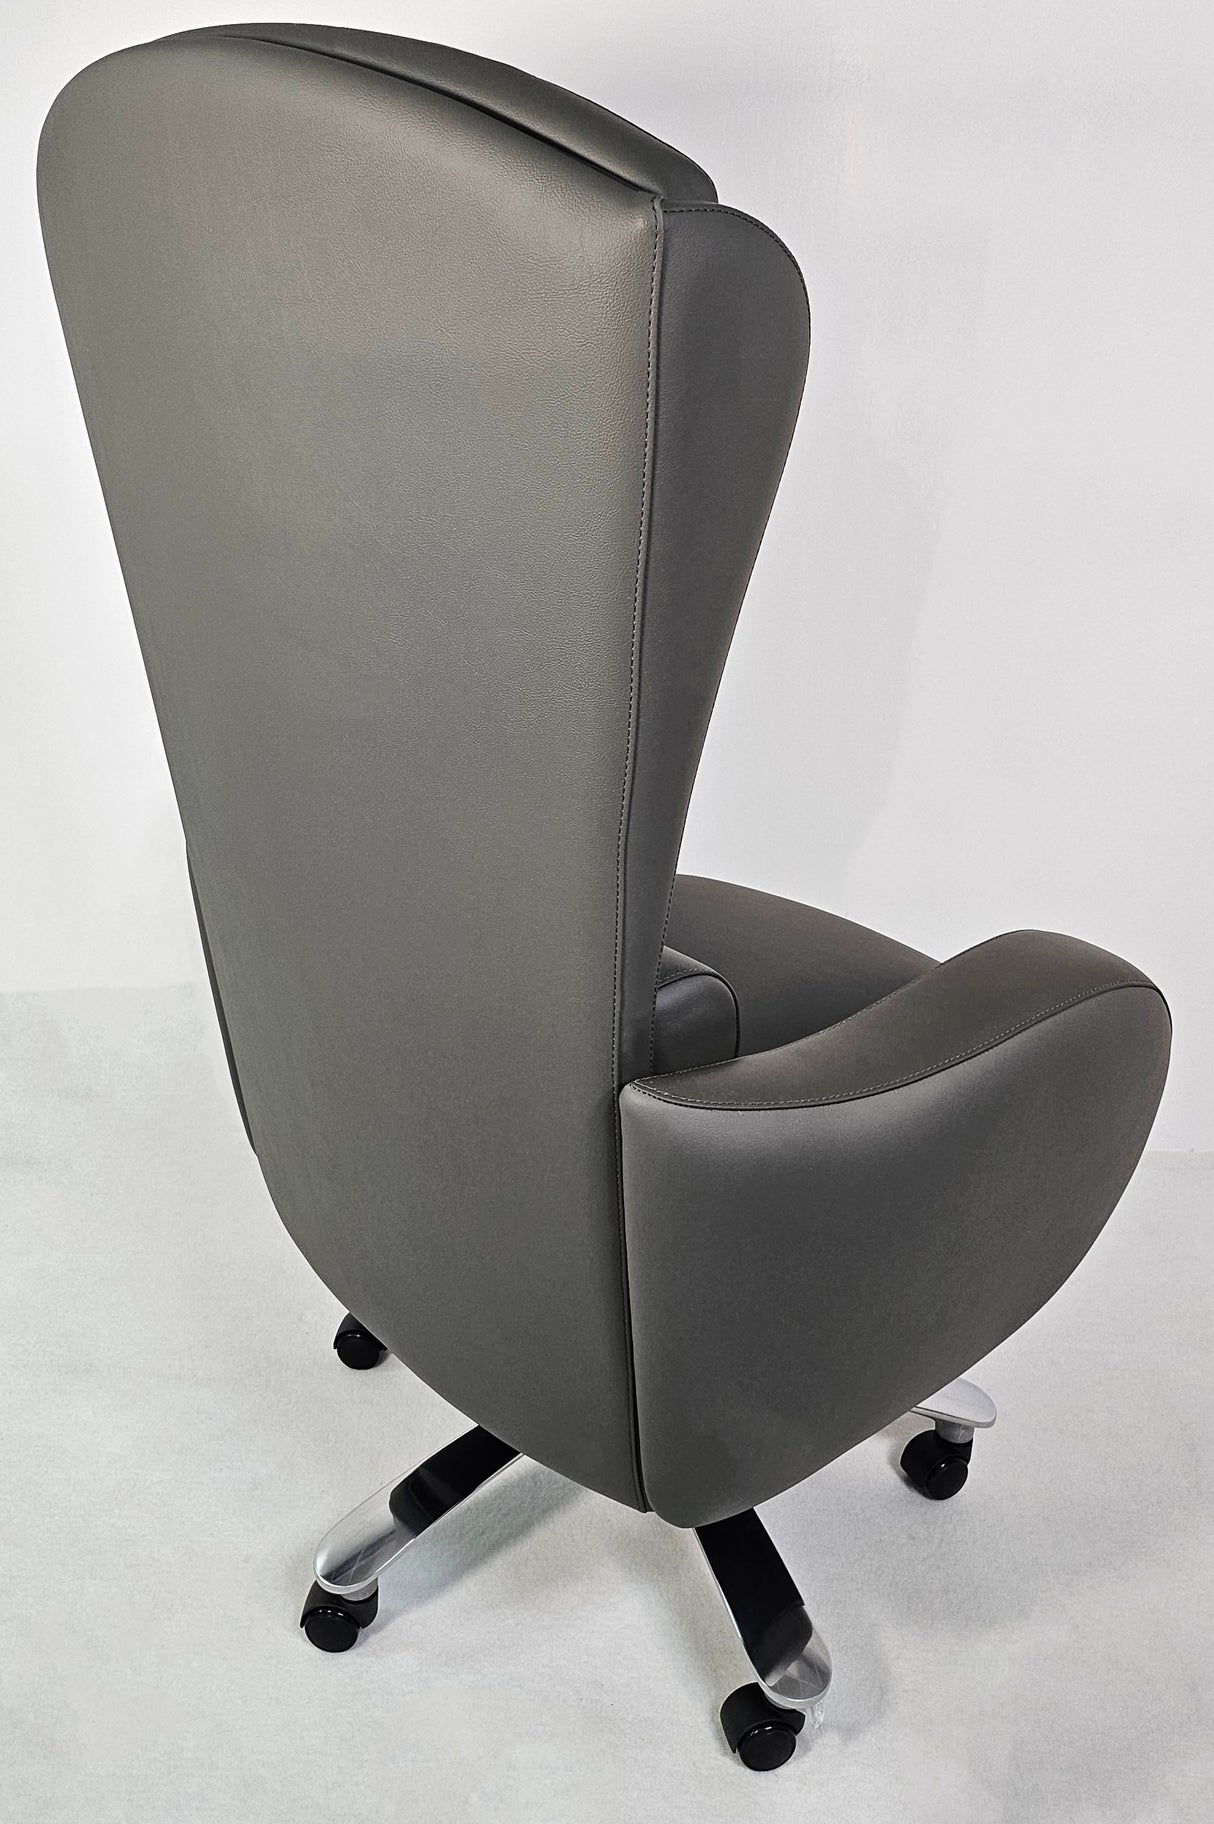 Genuine Grey Leather High Back Executive Office Chair with Chesterfield Design - 6002HL